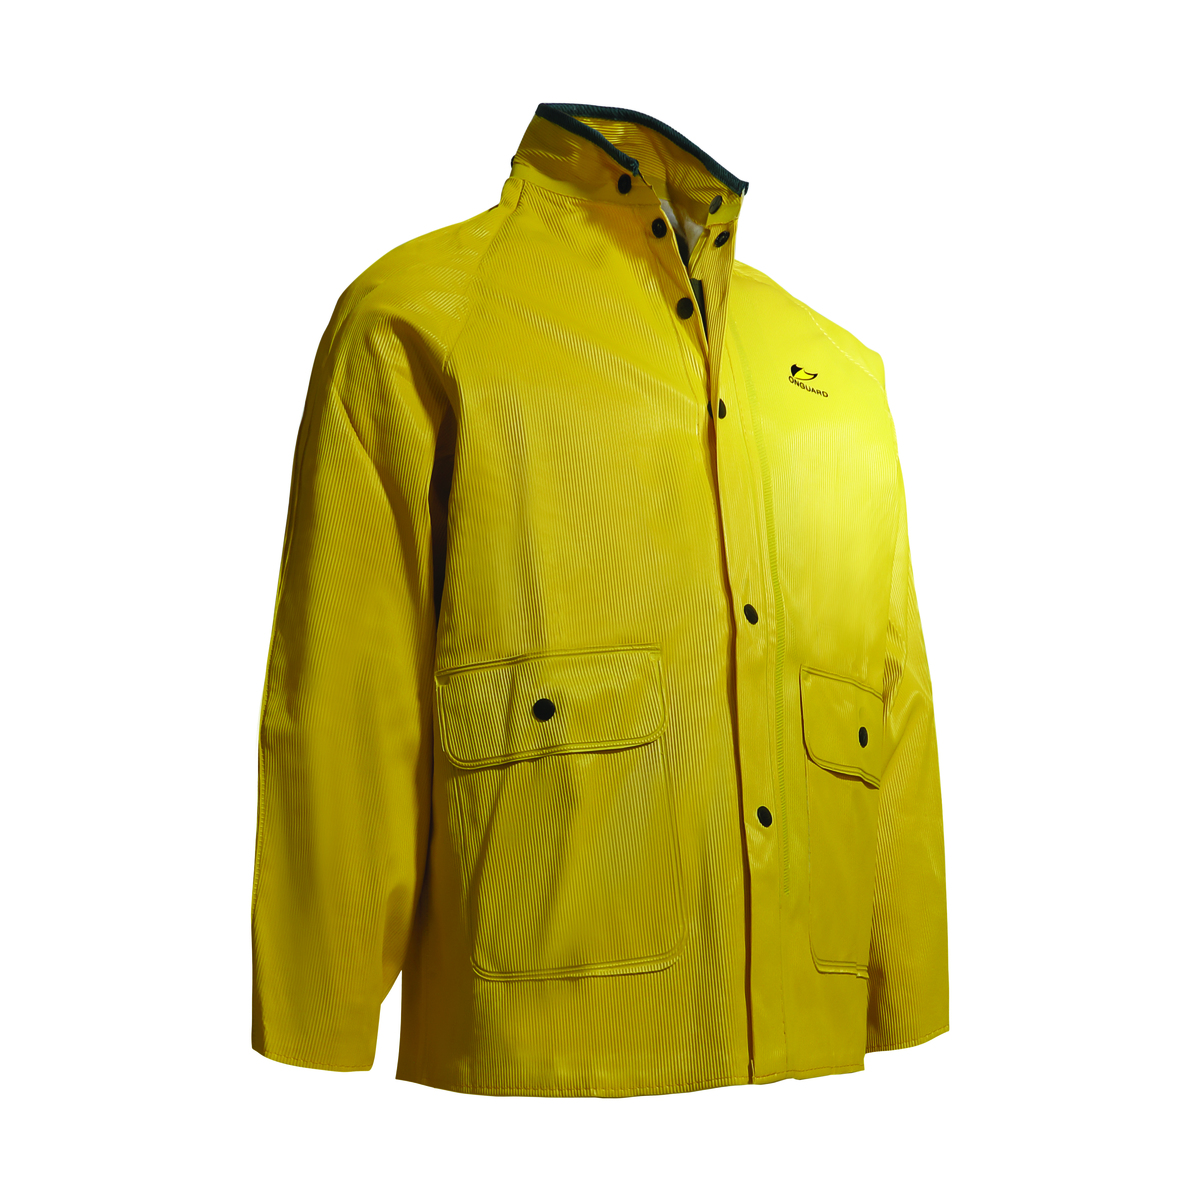 Dunlop® Protective Footwear 3X Yellow Webtex .65 mm Polyester/PVC Rain Jacket With Hood Snaps